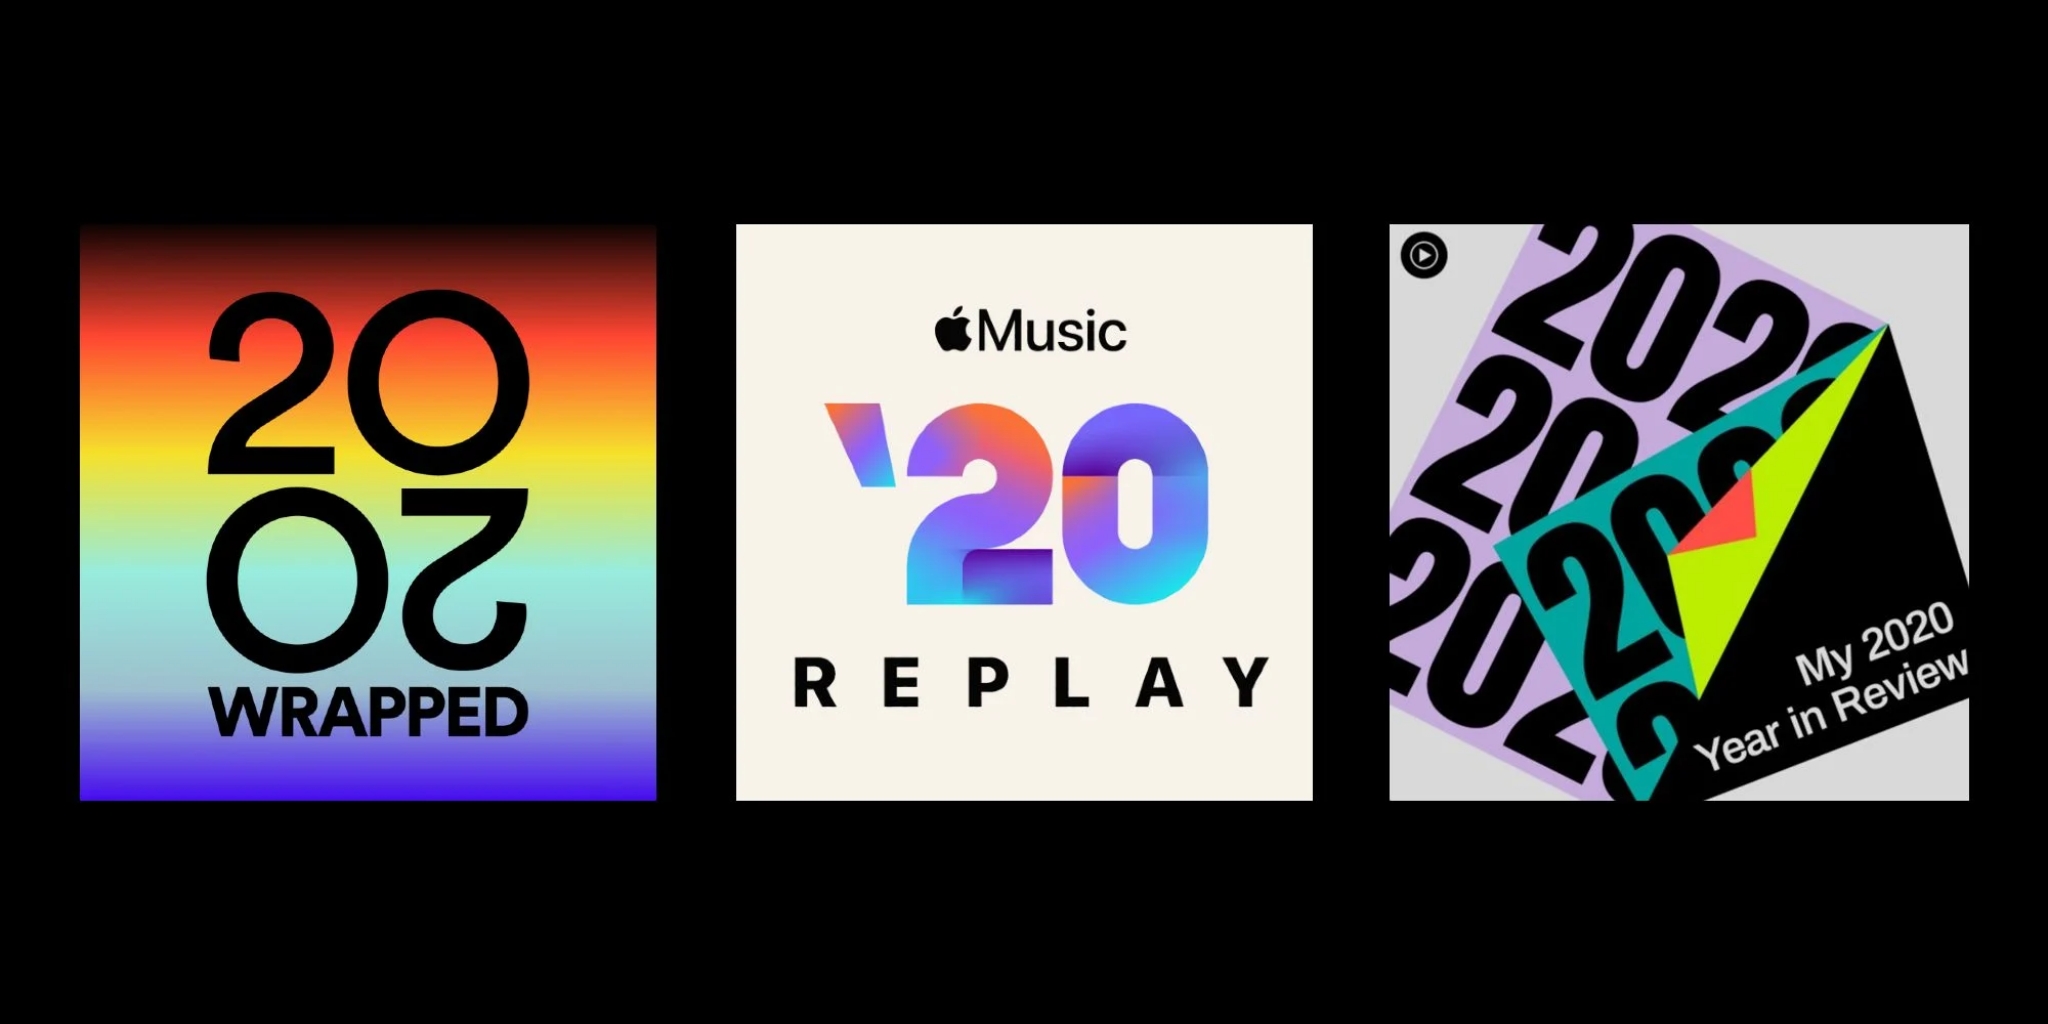 Spotify-2020-Wrapped-Apple-Music-Replay-2020-YouTube-Music-My-2020-Year-in-Review-logos.jpg